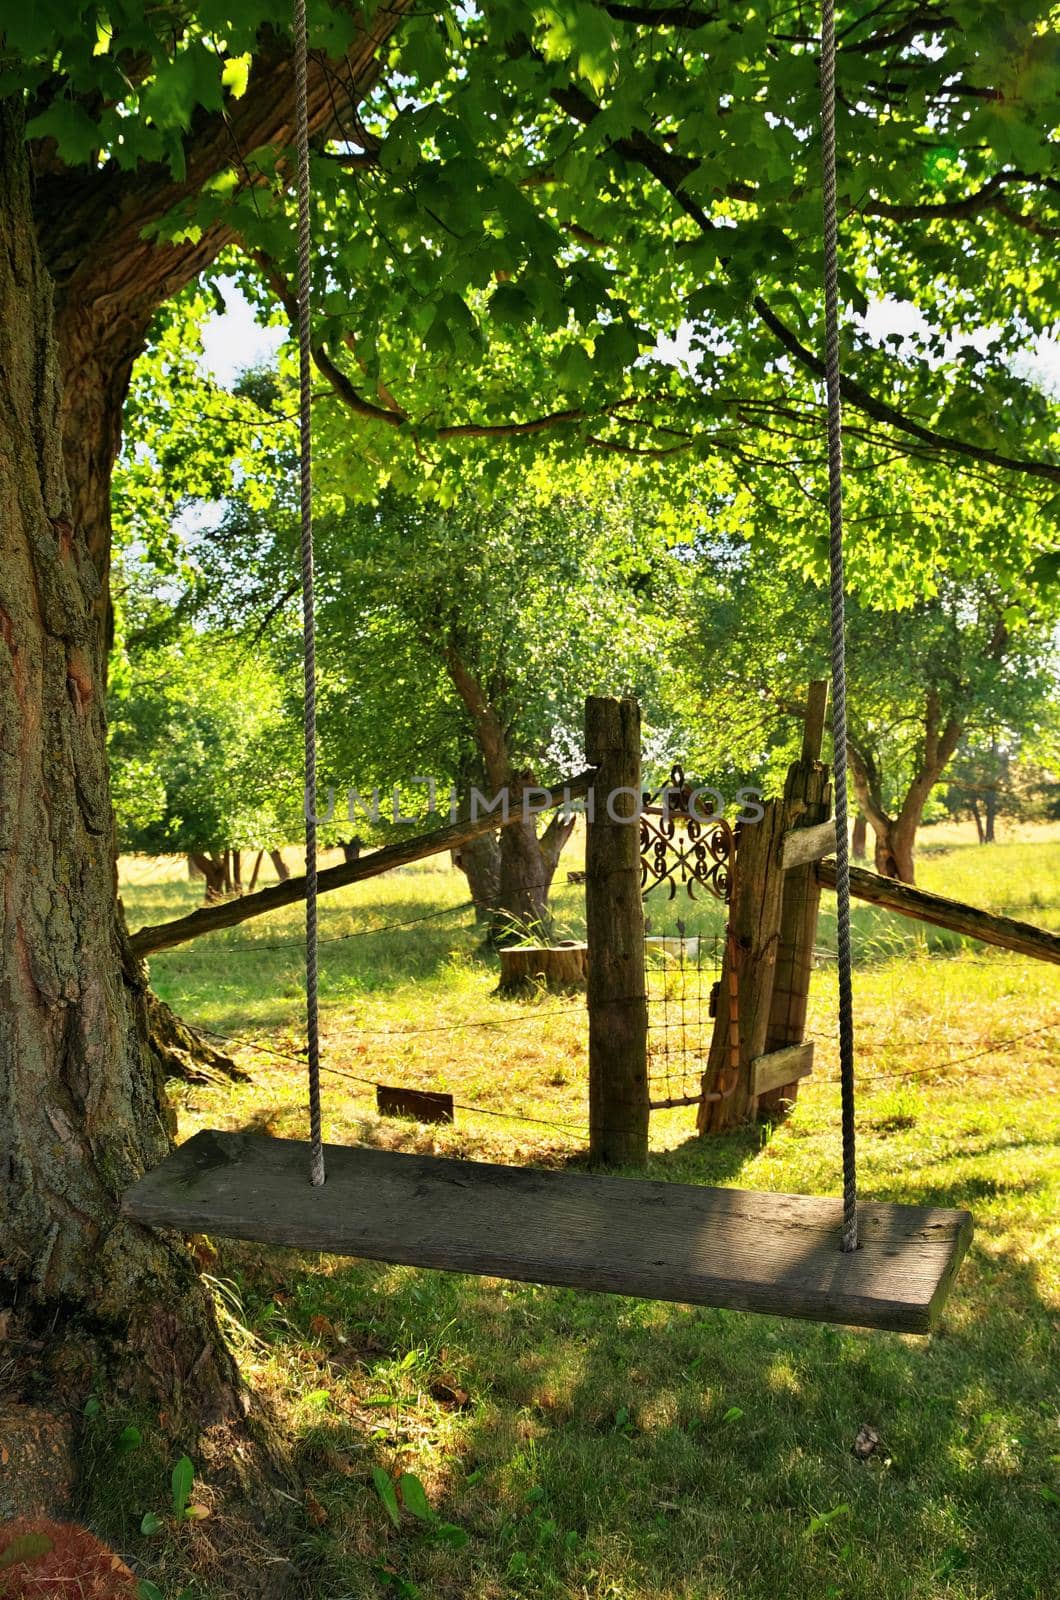 Homemade Rustic Wooden Swing Underneath Maple Tree on Farm in Summer by markvandam